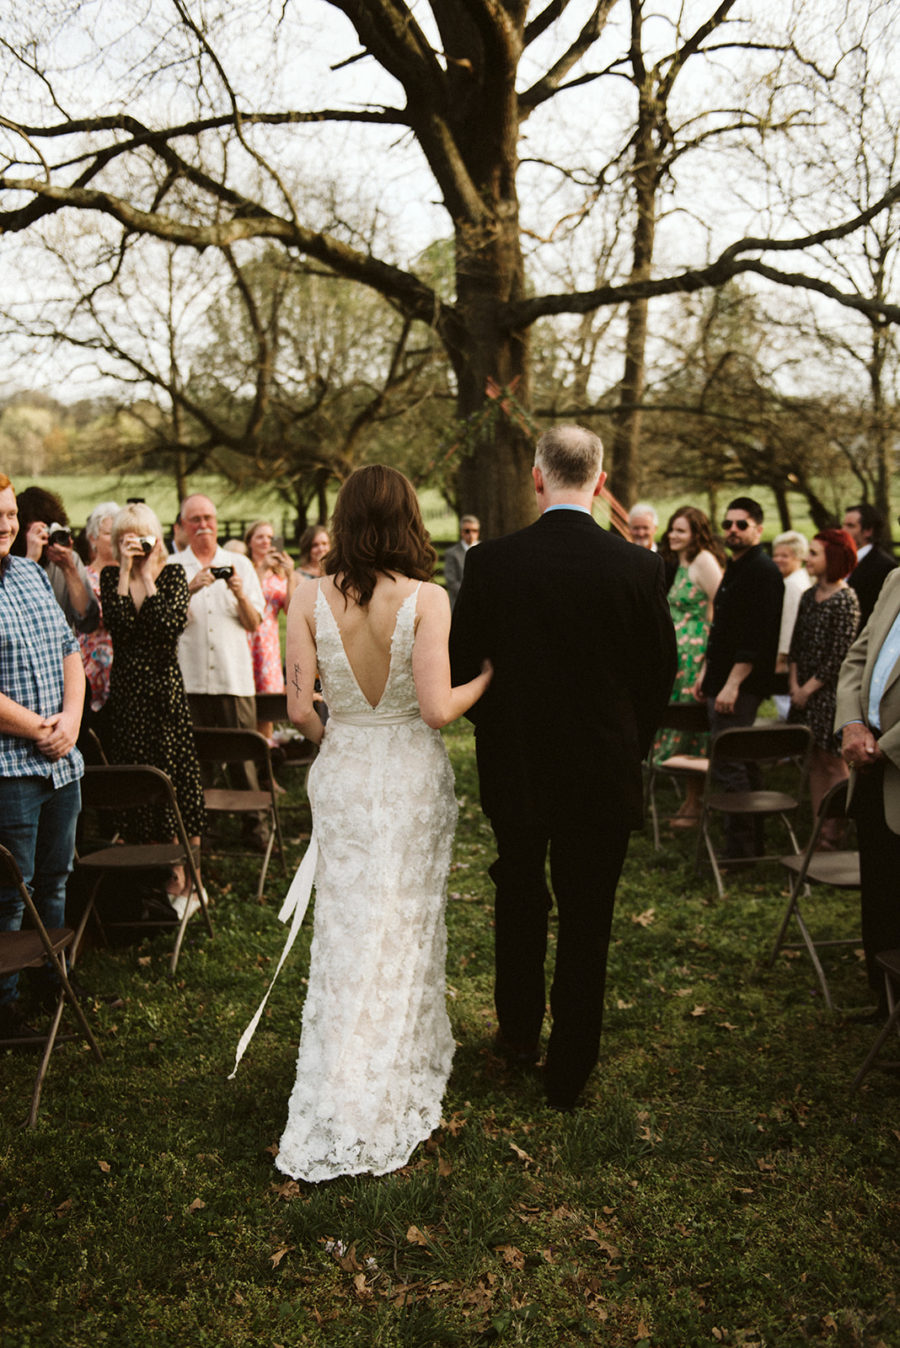 Intimate Spring Wedding at Private Residence featured on Nashville Bride Guide